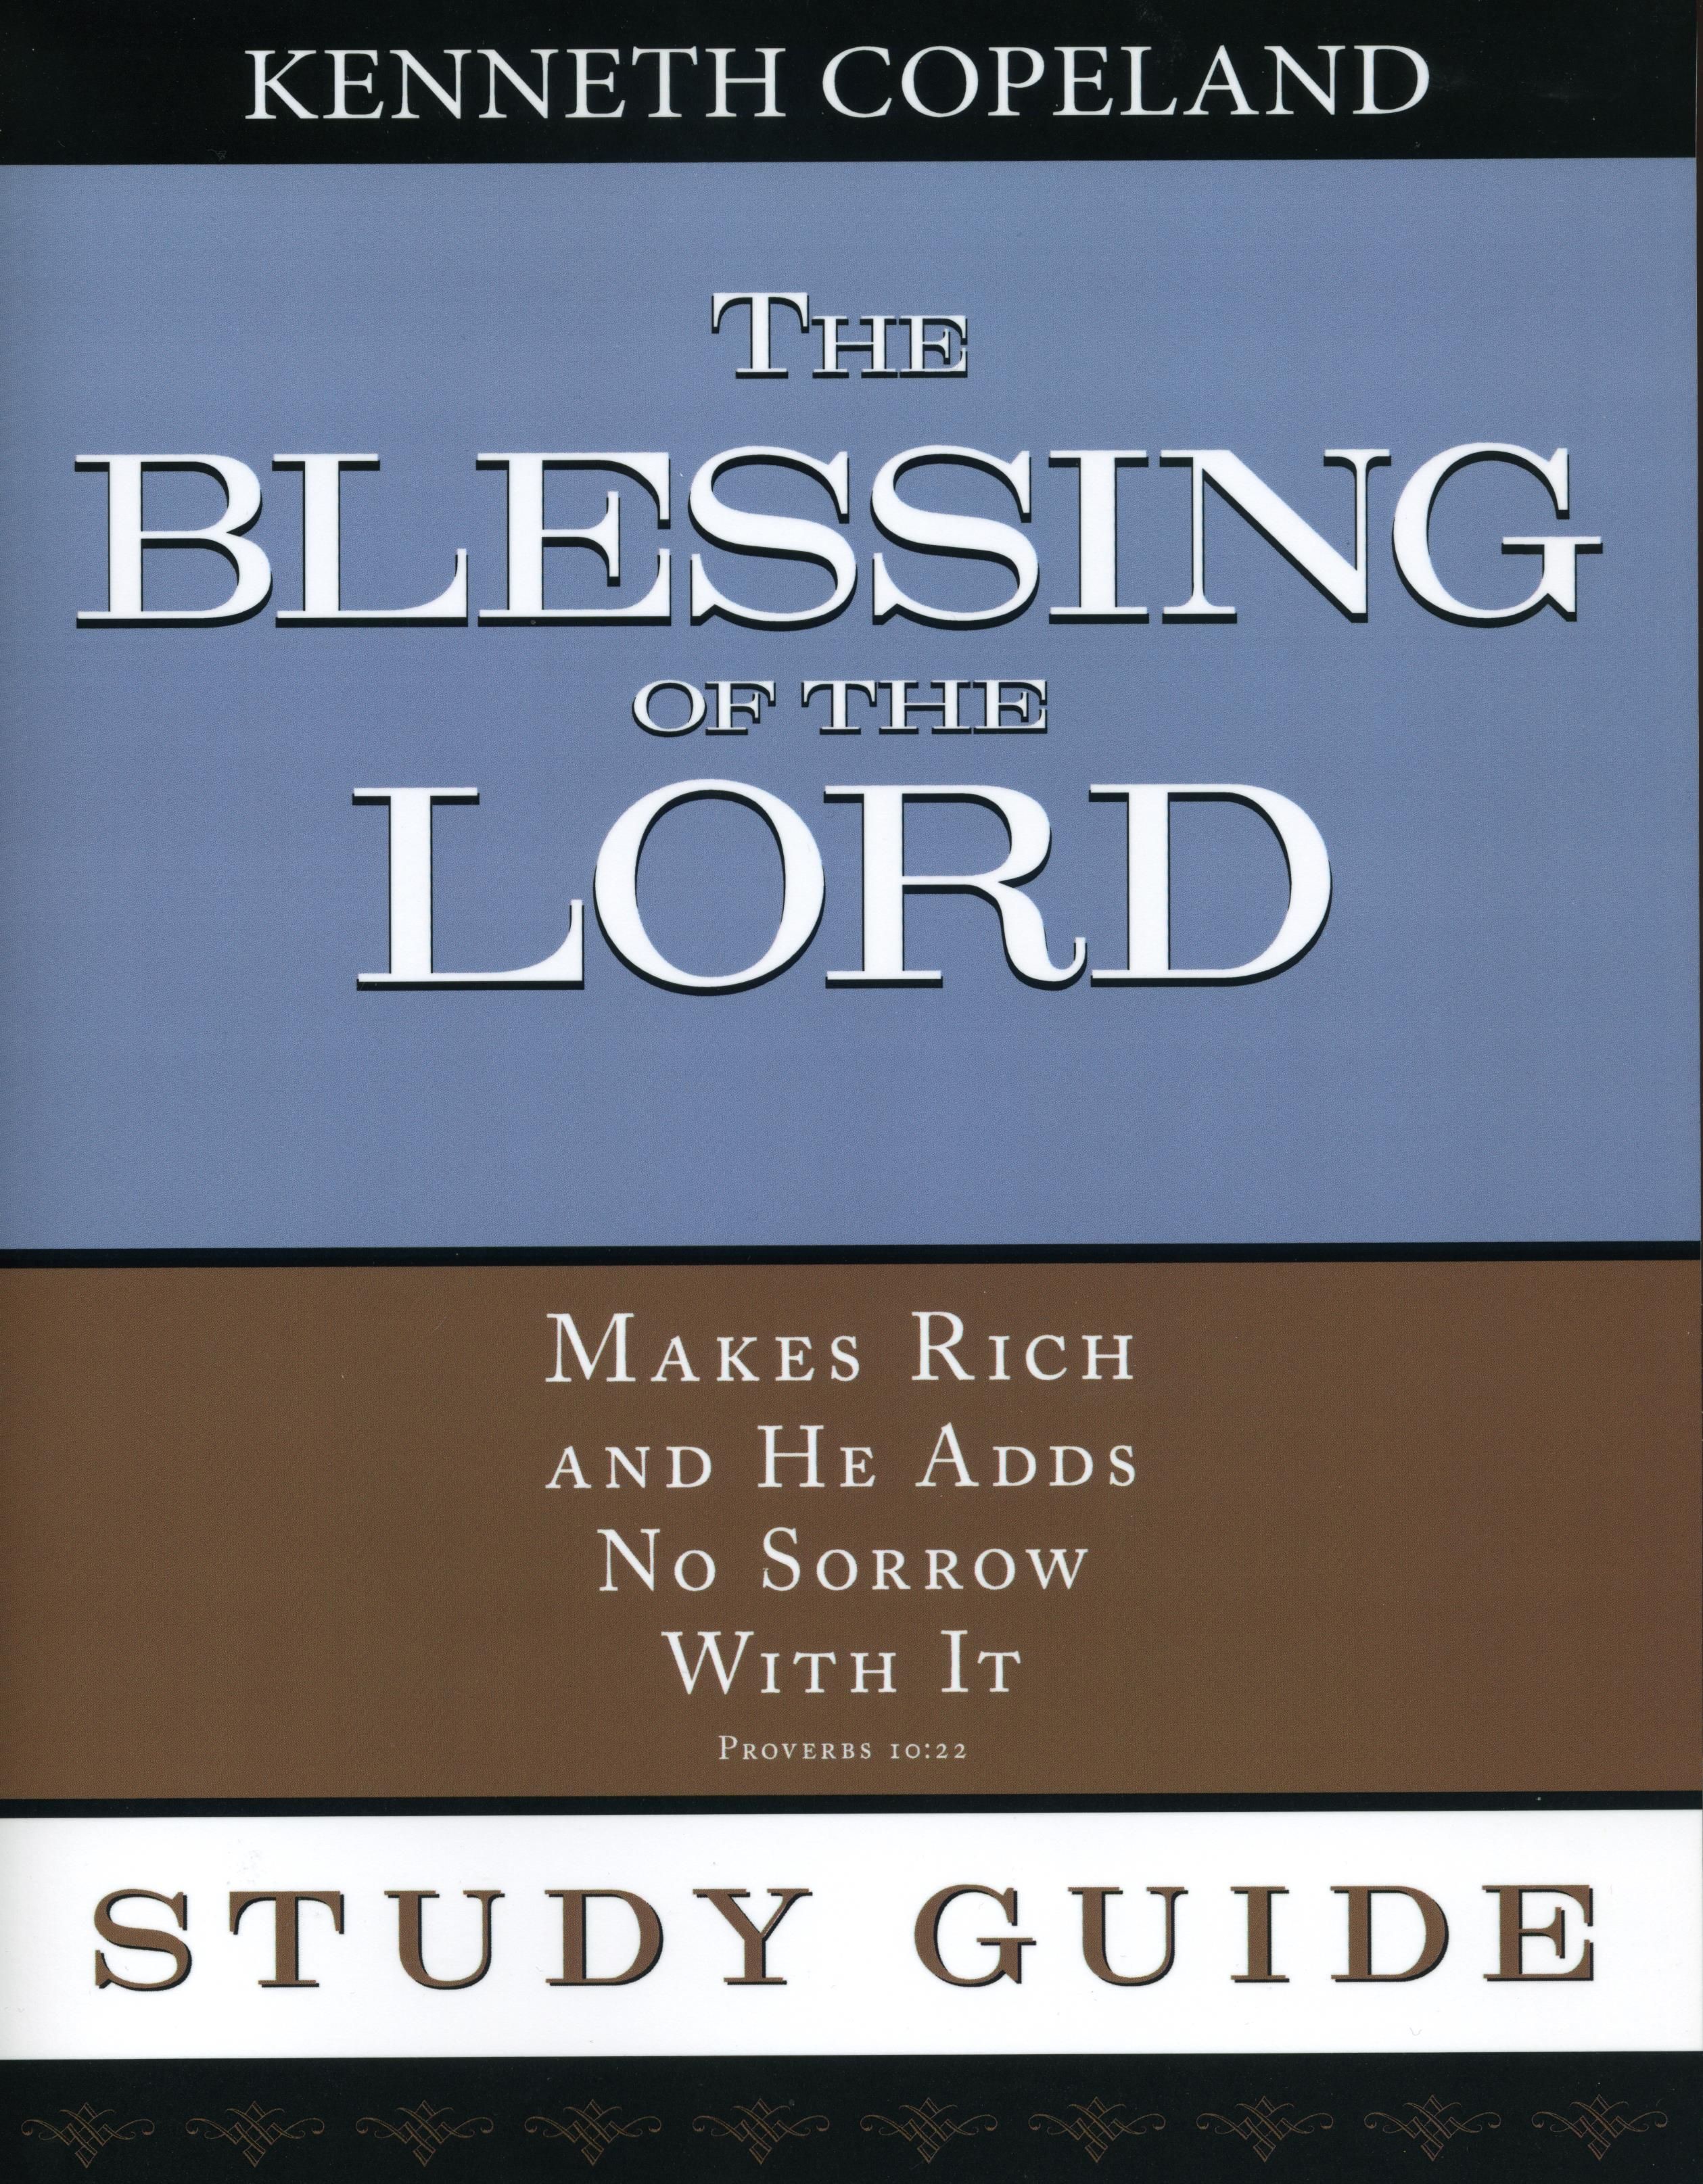 K. Copeland: The Blessing of the Lord (Study-Guide)